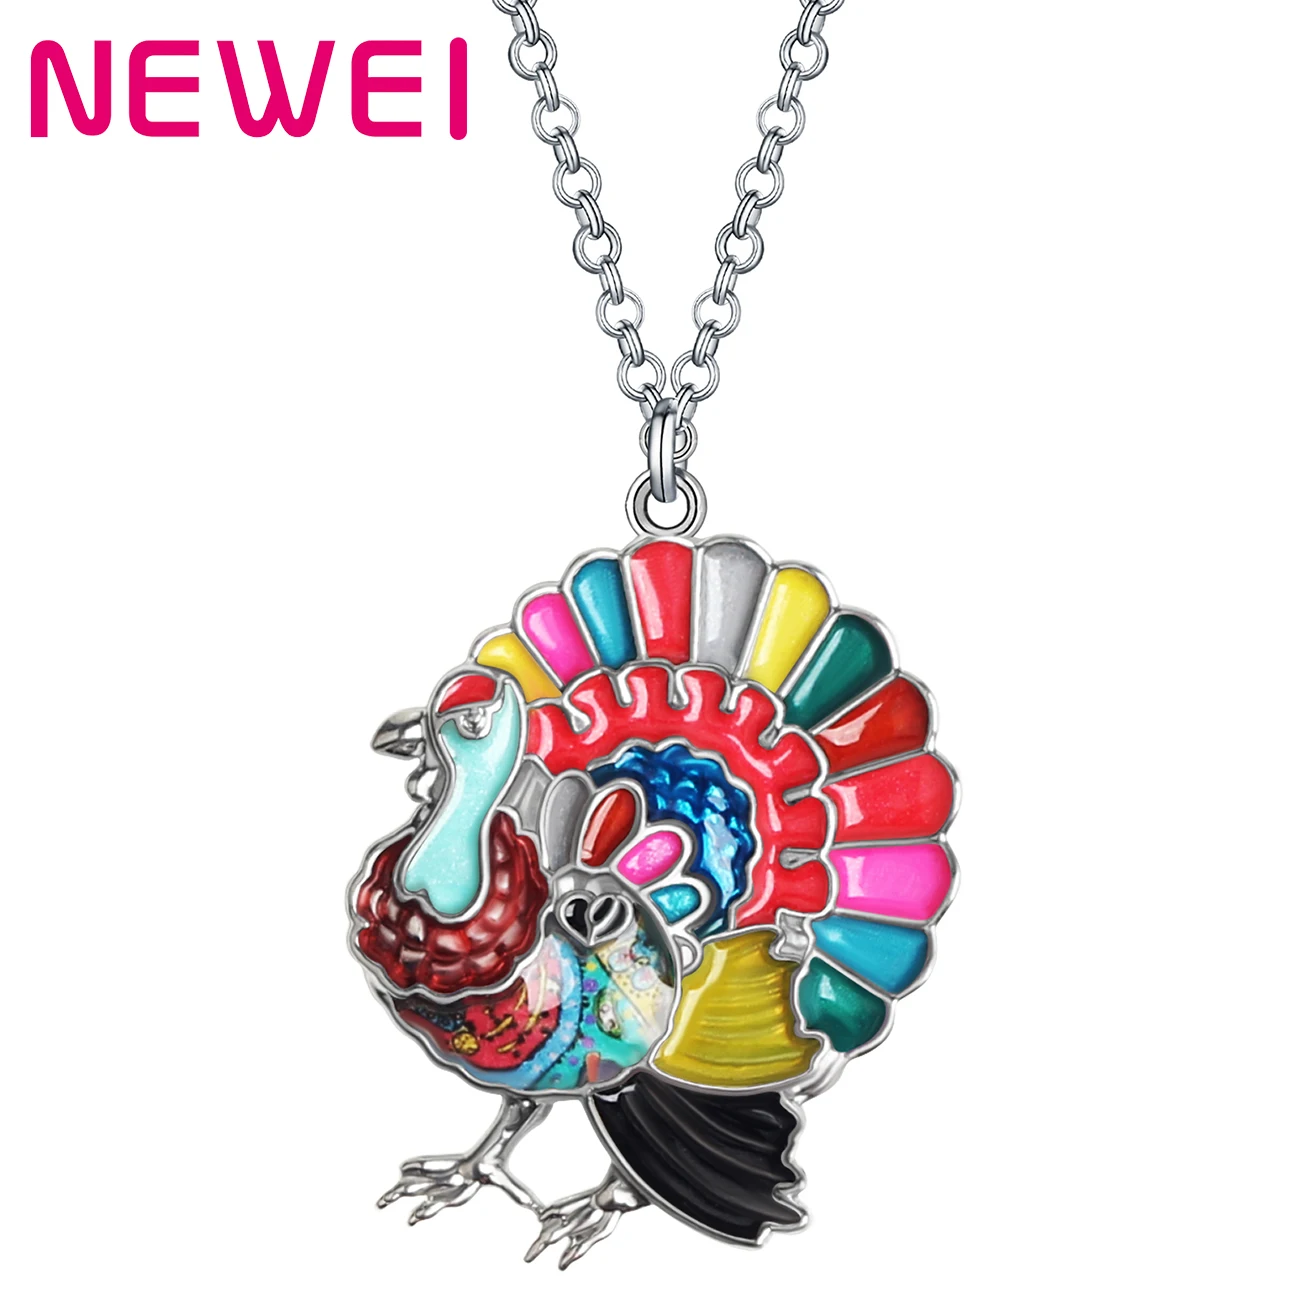 

Thanksgiving Enamel Alloy Floral Sweet Turkey Chicken Necklace Pendant Chain Trendy Jewelry For Women Girls Teens Charms Gifts, Blue brown black multicolor yellow purple